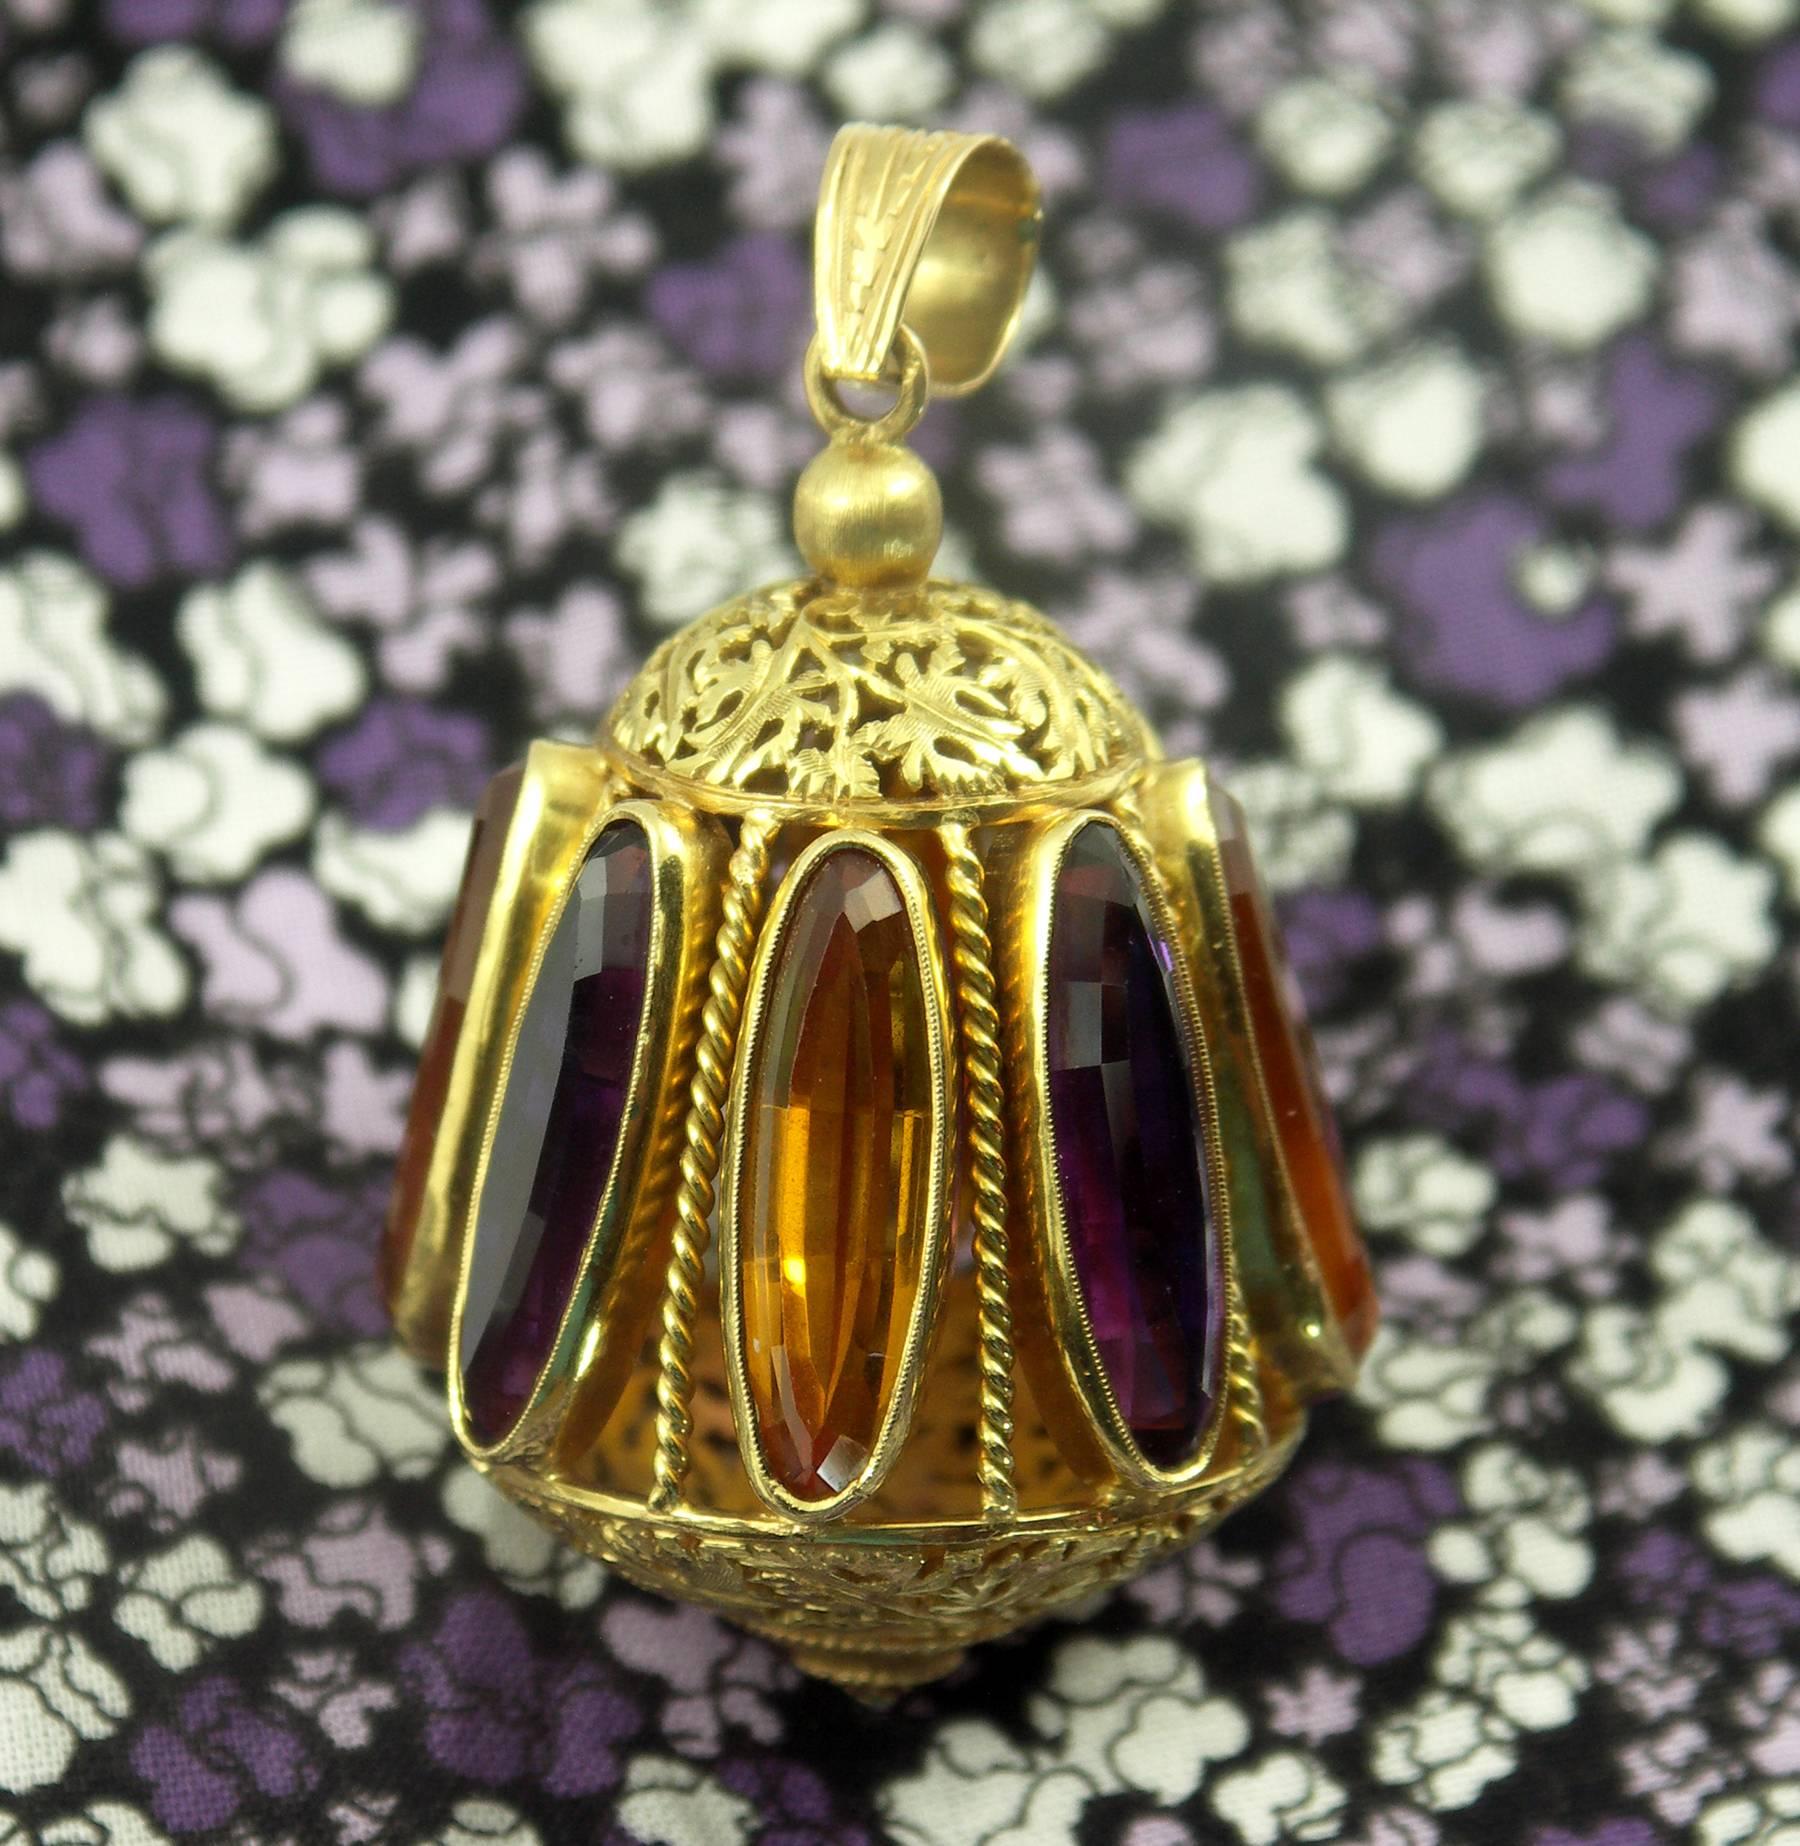 An amazingly large 18K yellow gold charm measuring 2 1/2 inches long and 1 1/2 inches wide, set with alternating faceted amethyst and citrine. With beautiful twisted wire supports between each stone, this pendant is further embellished with organic